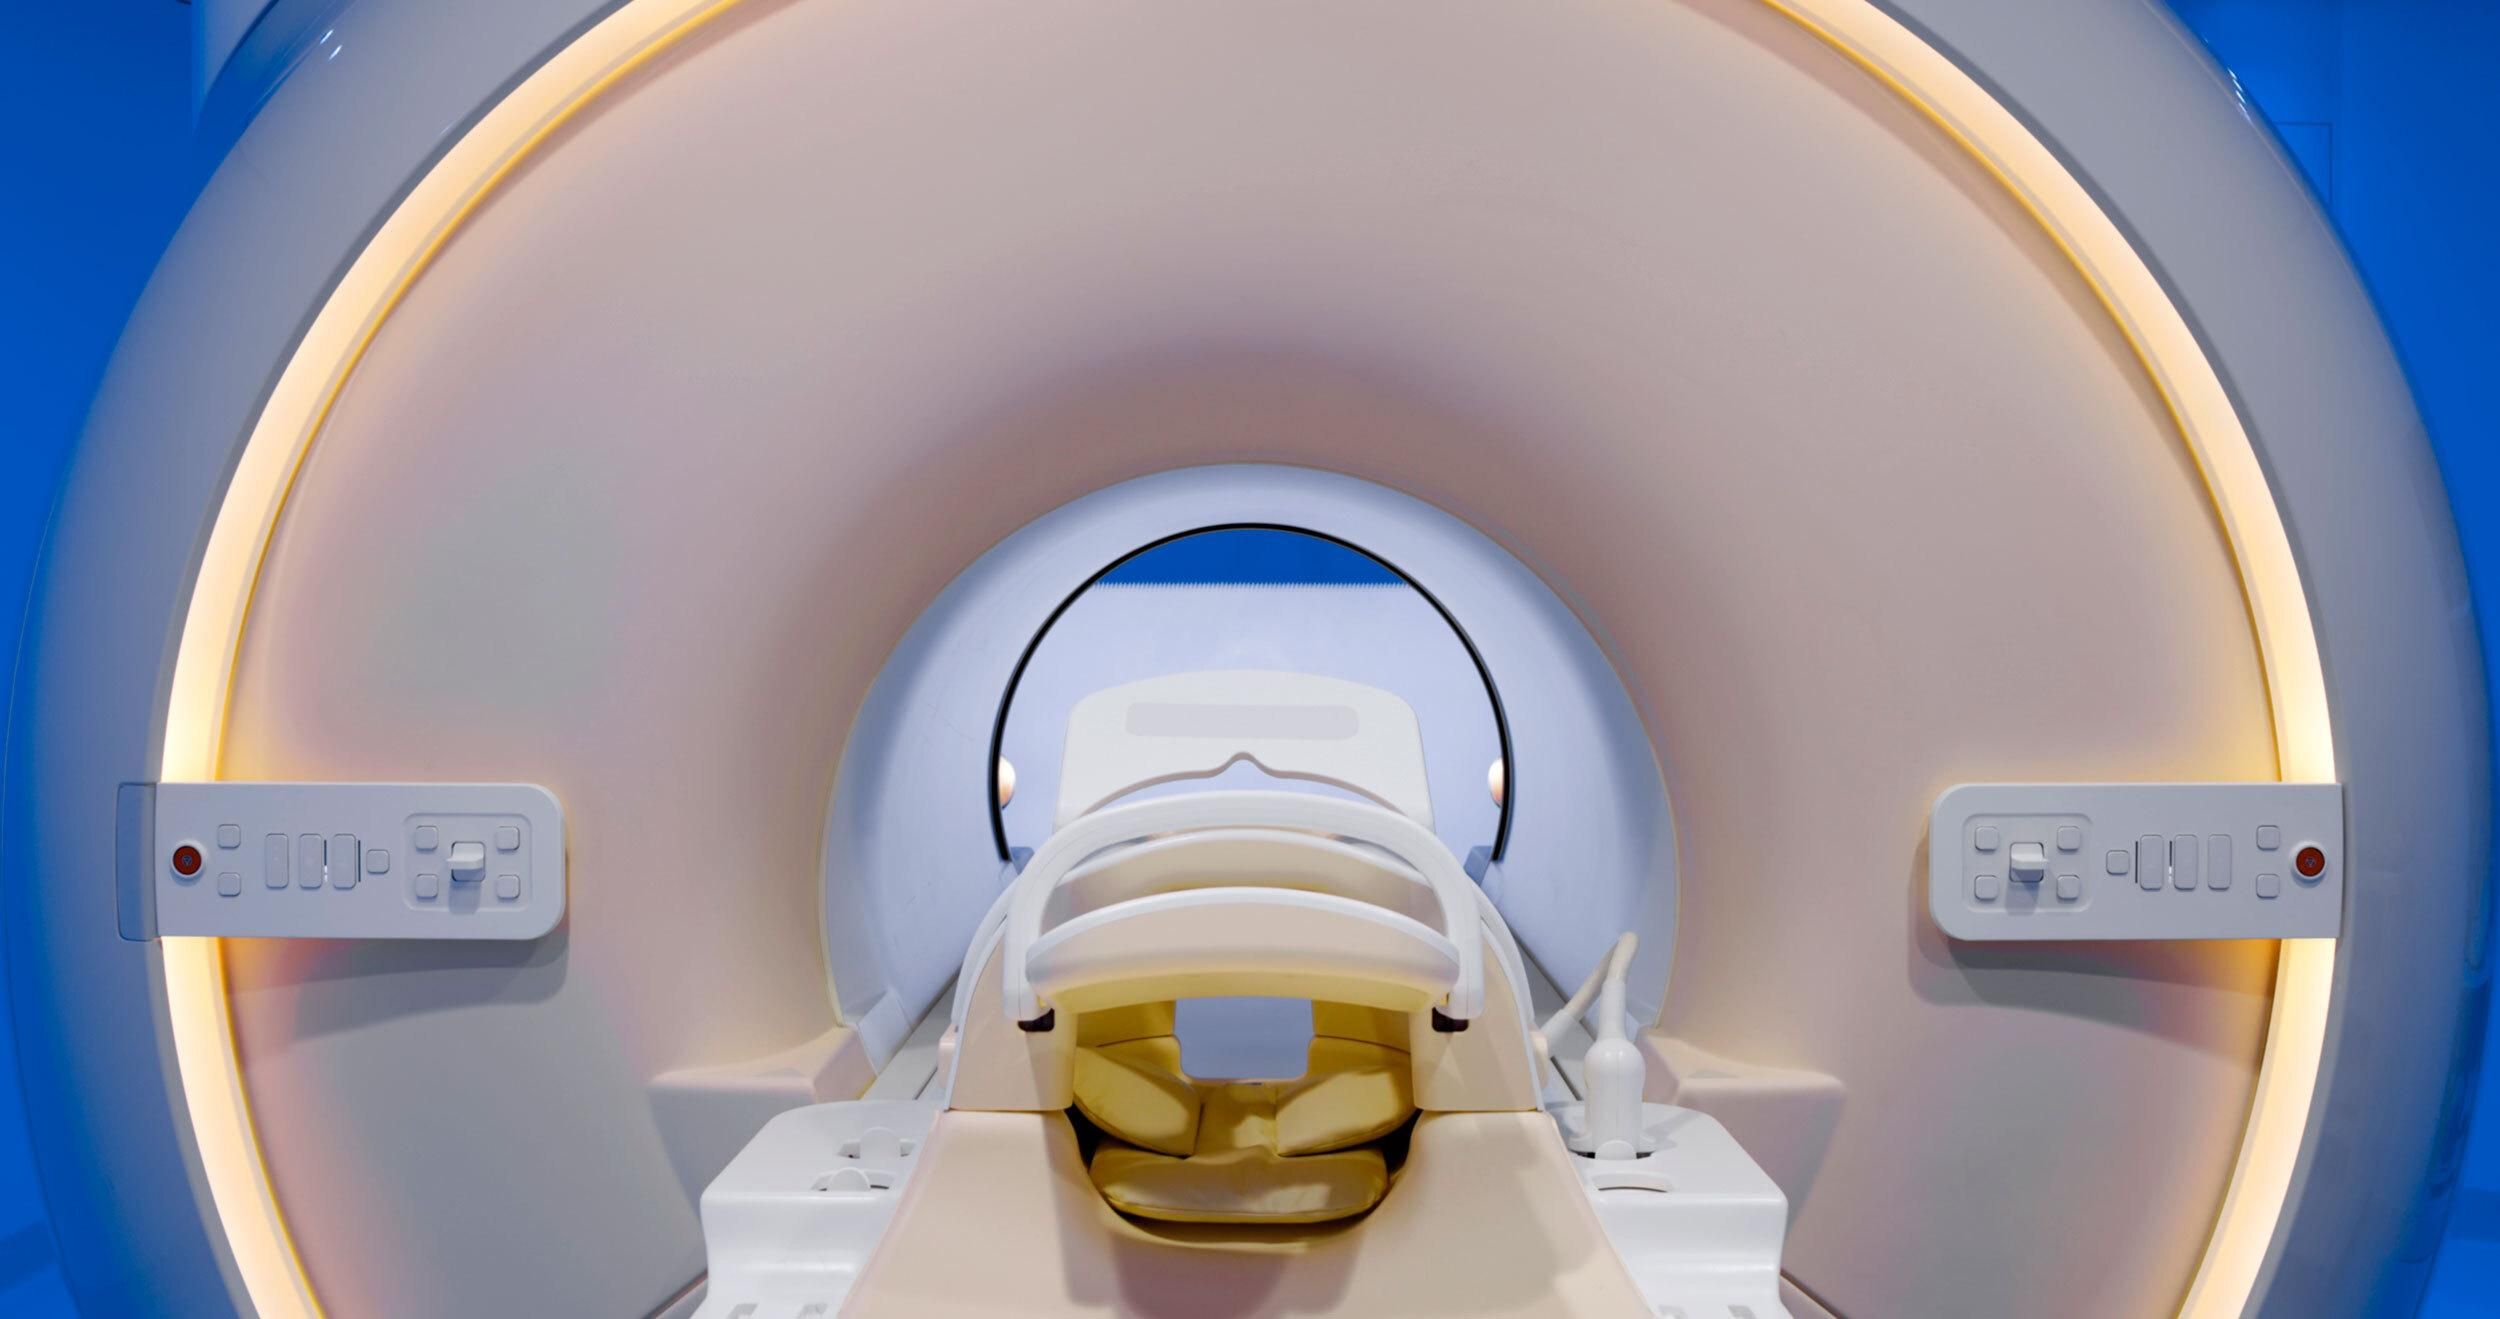 Looking through the opening of an MRI machine